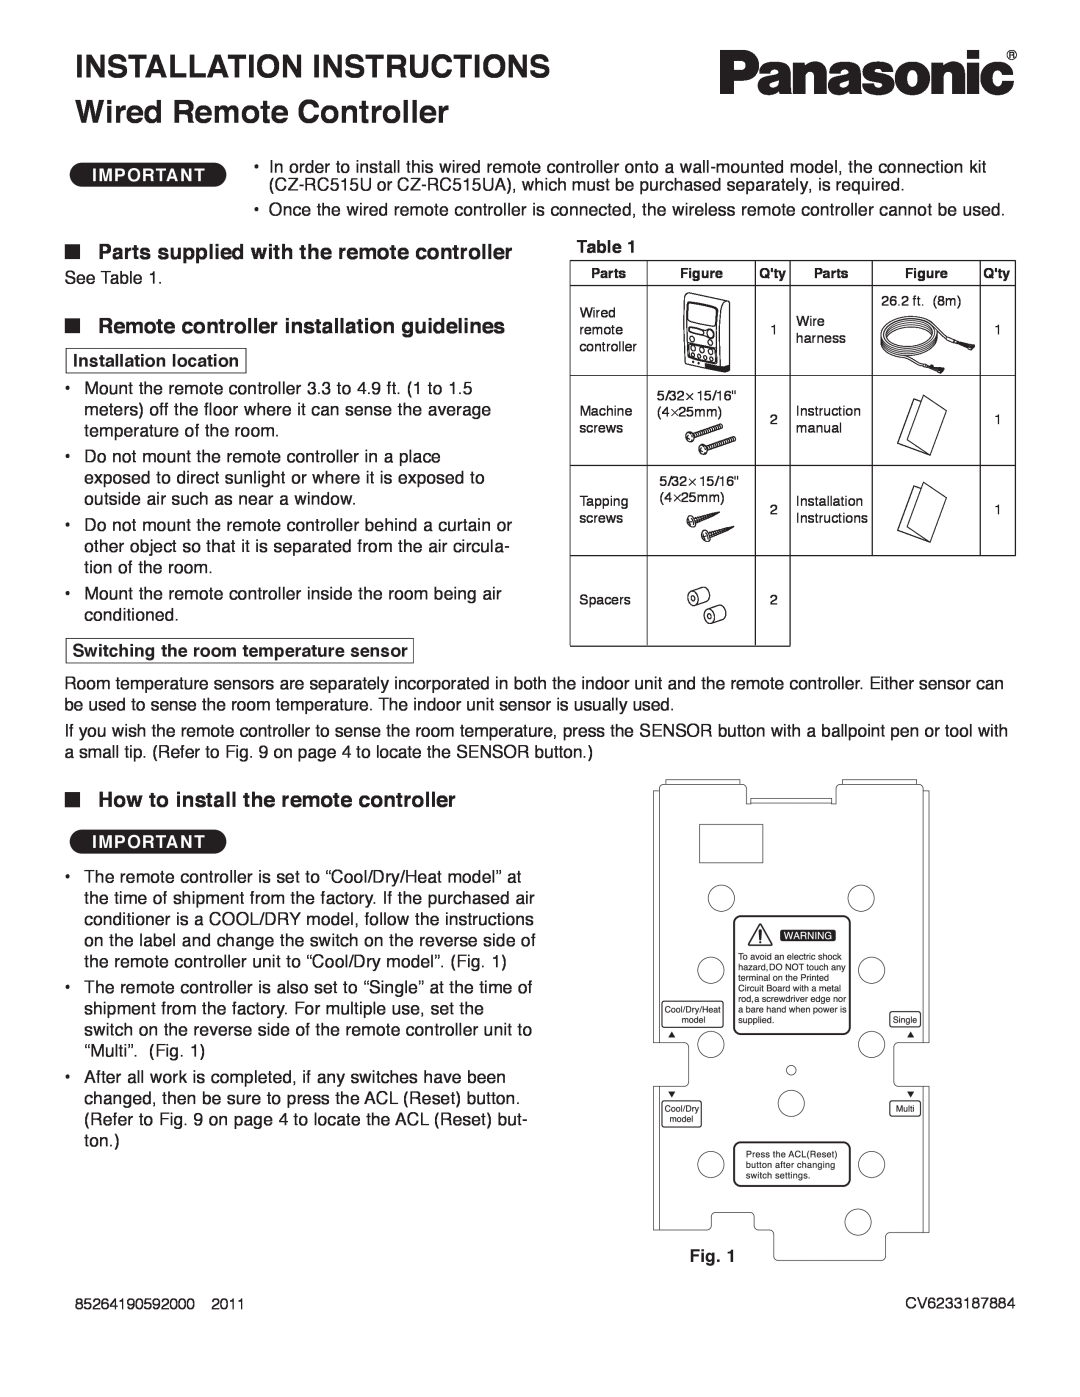 Panasonic CS-MKE12NB4U INSTALLATION INSTRUCTIONS Wired Remote Controller, Parts supplied with the remote controller, Table 